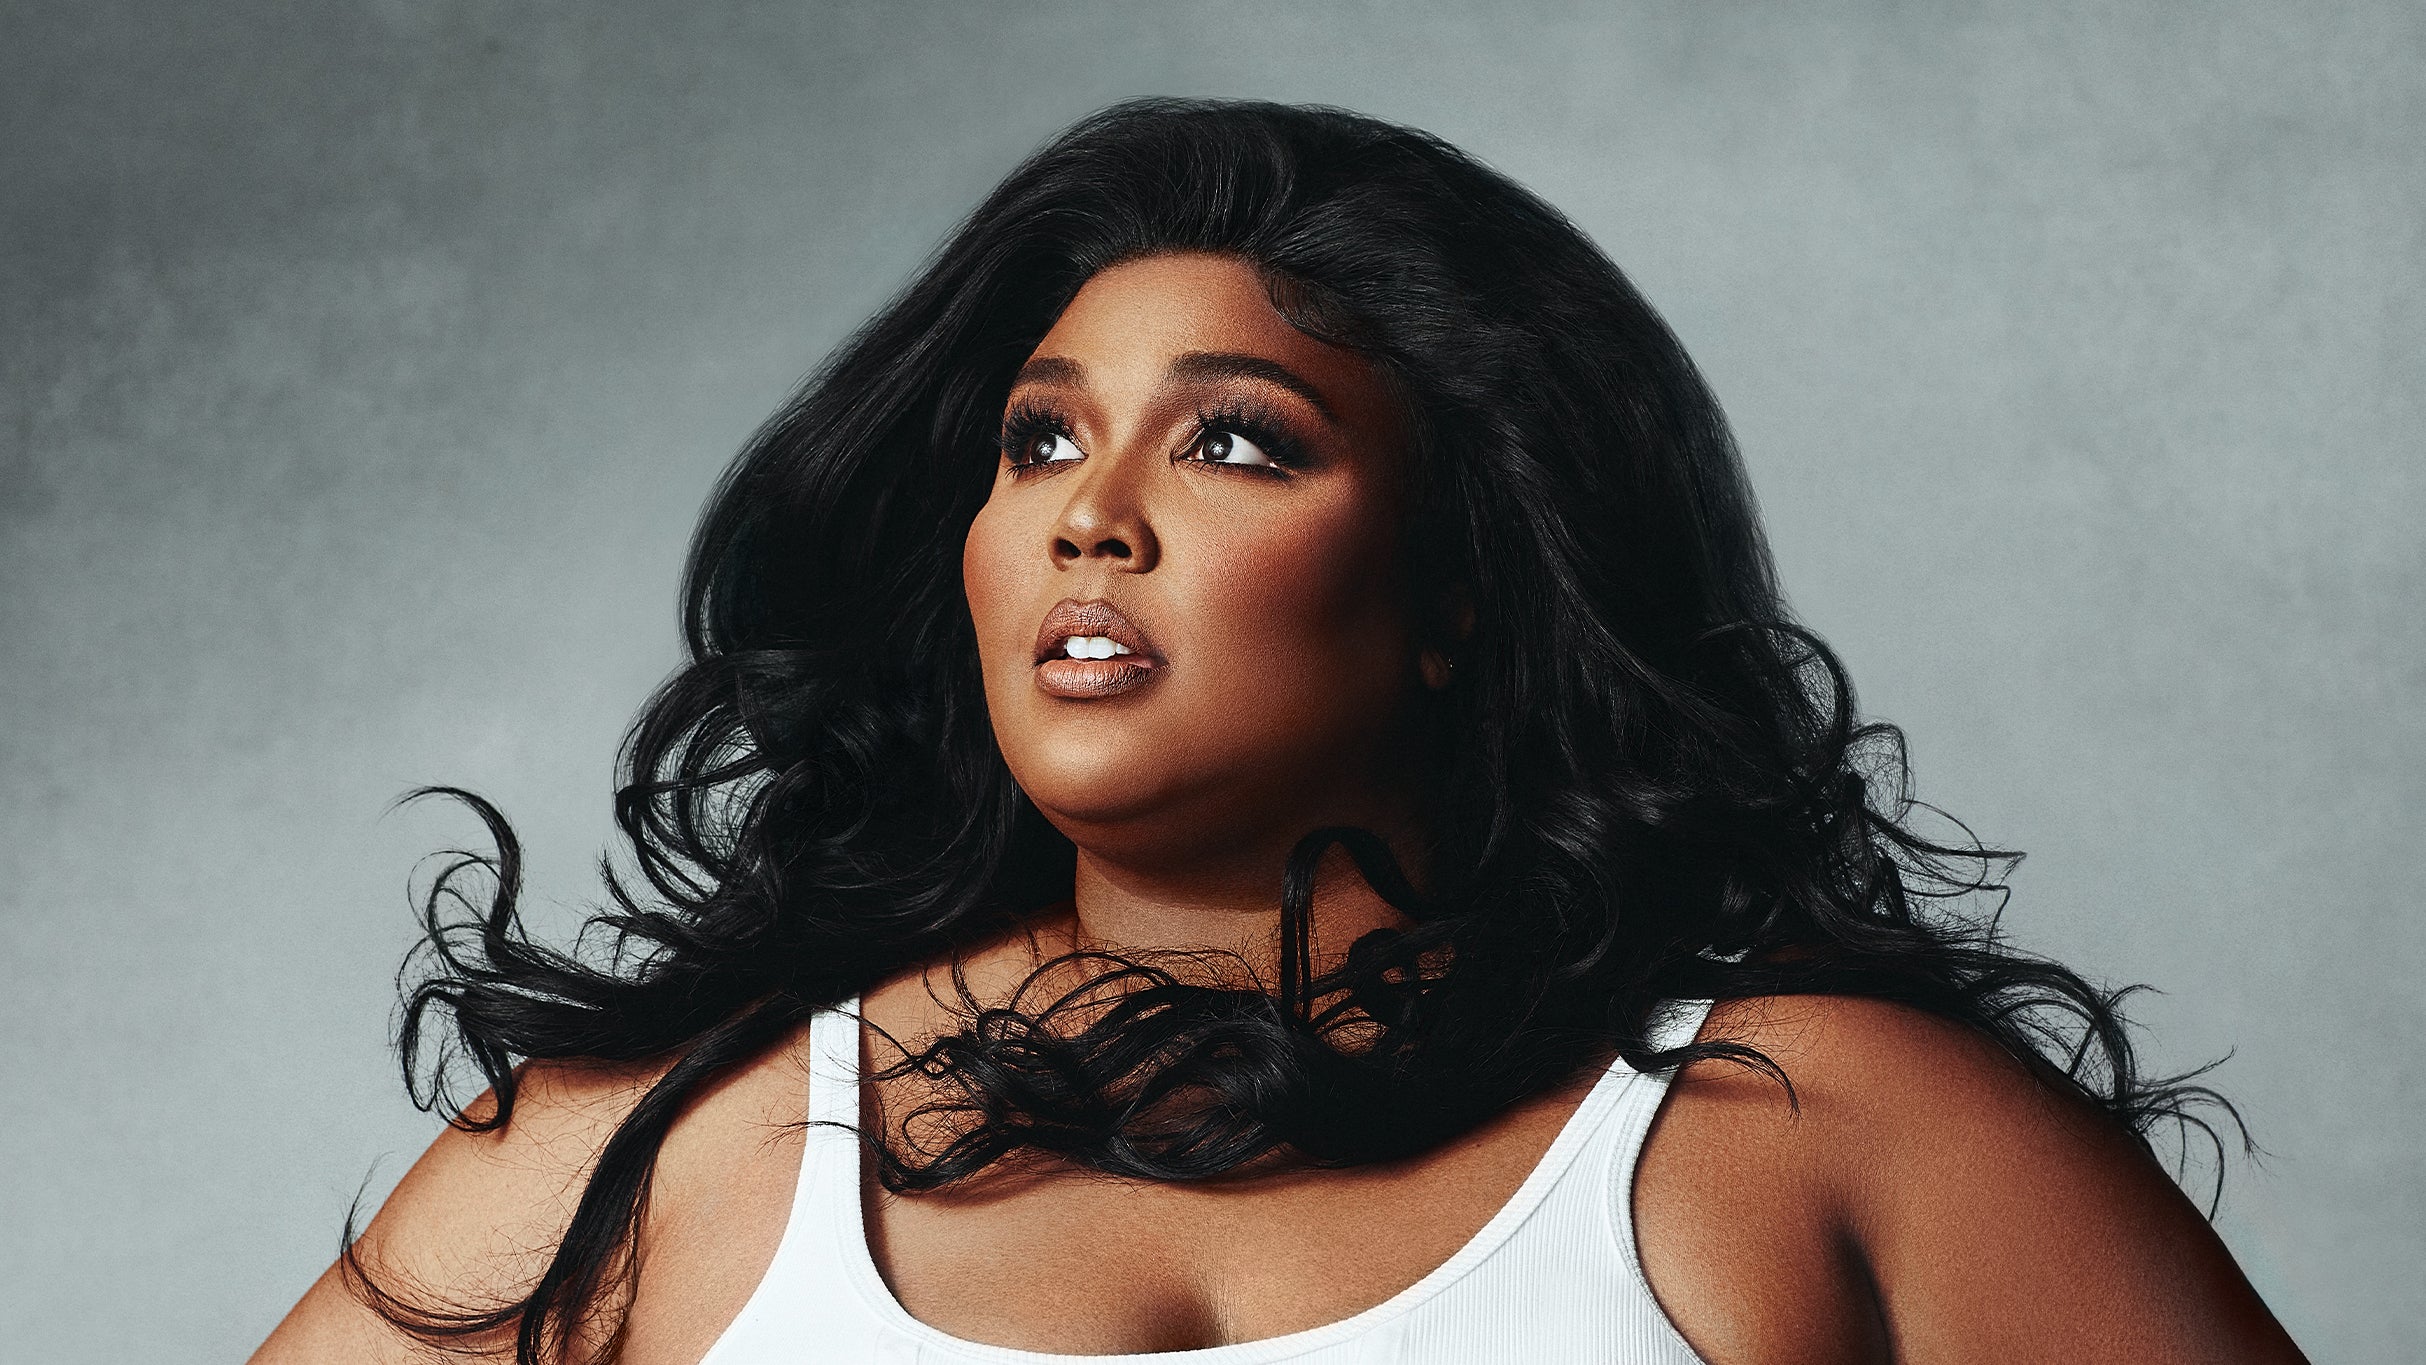 Lizzo free presale password for early tickets in Auckland